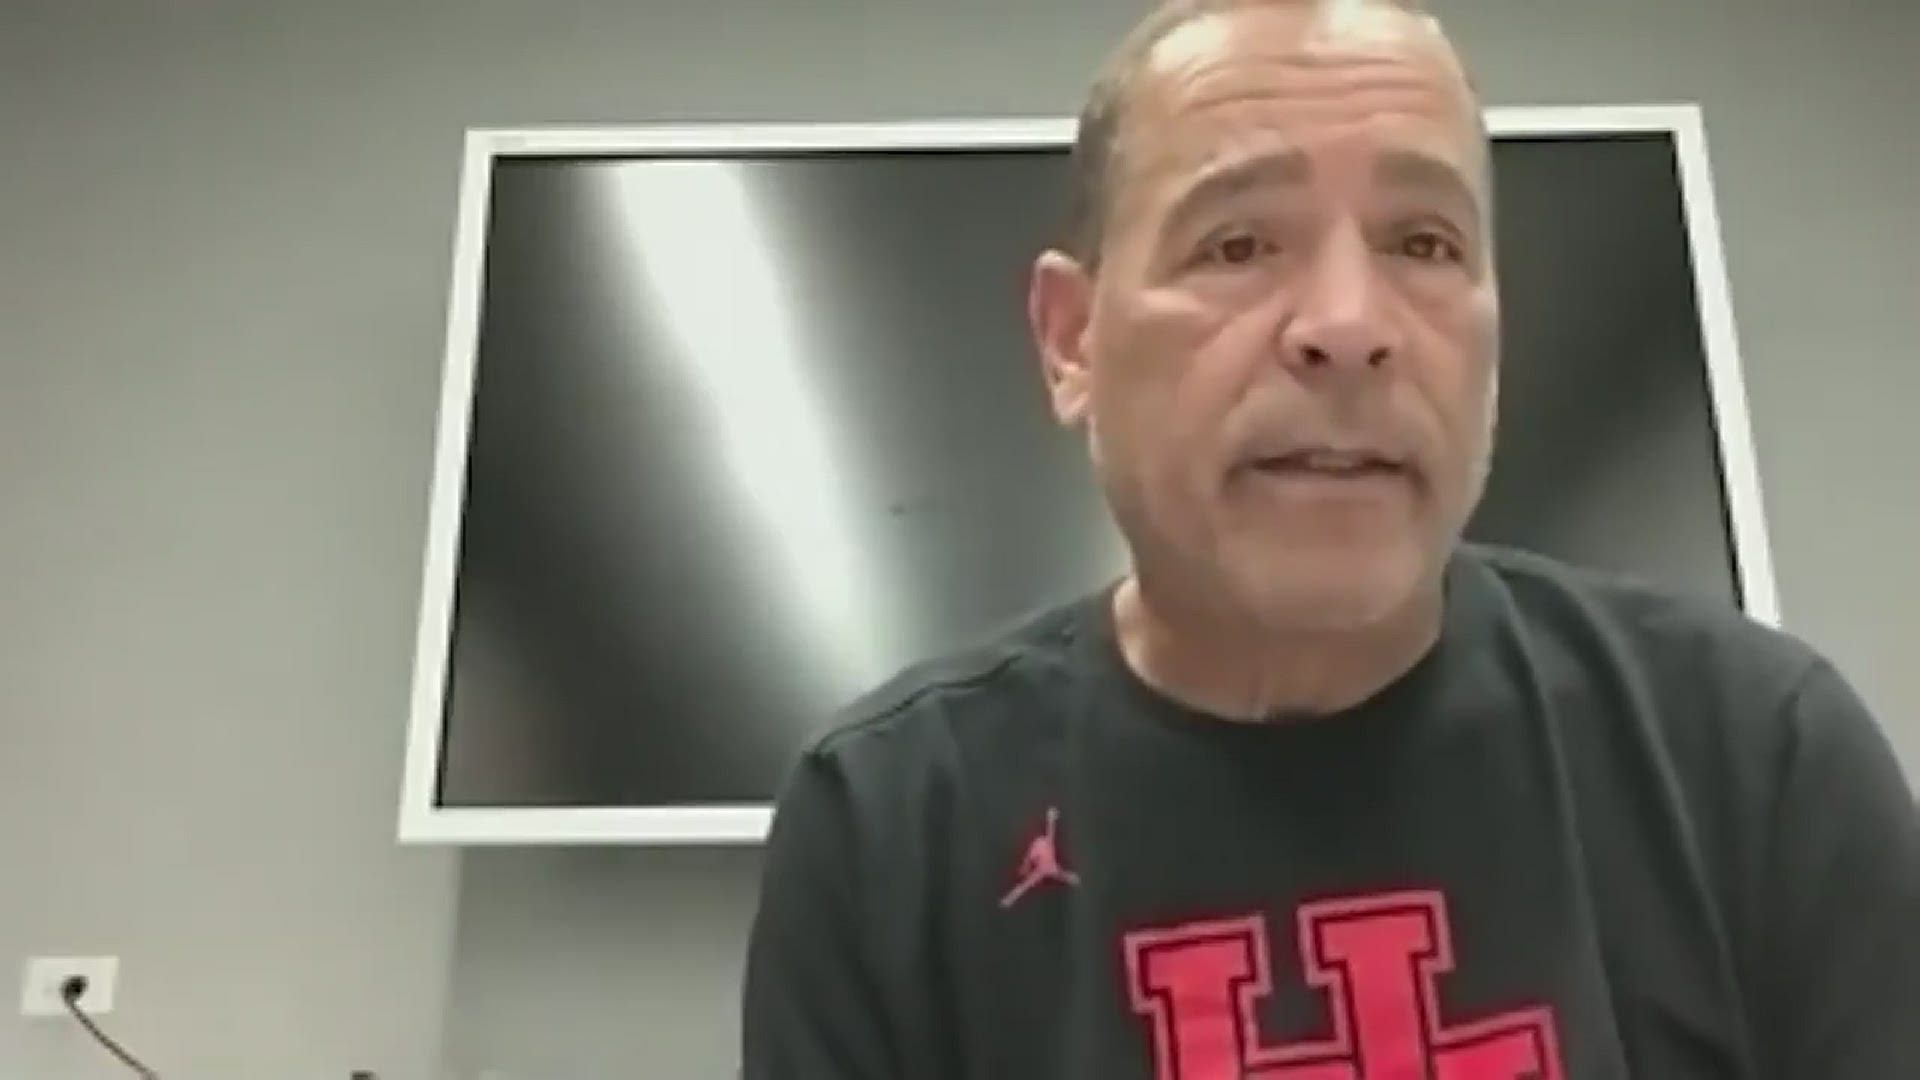 According to University of Houston basketball coach Kelvin Sampson, all 15 players have had COVID,